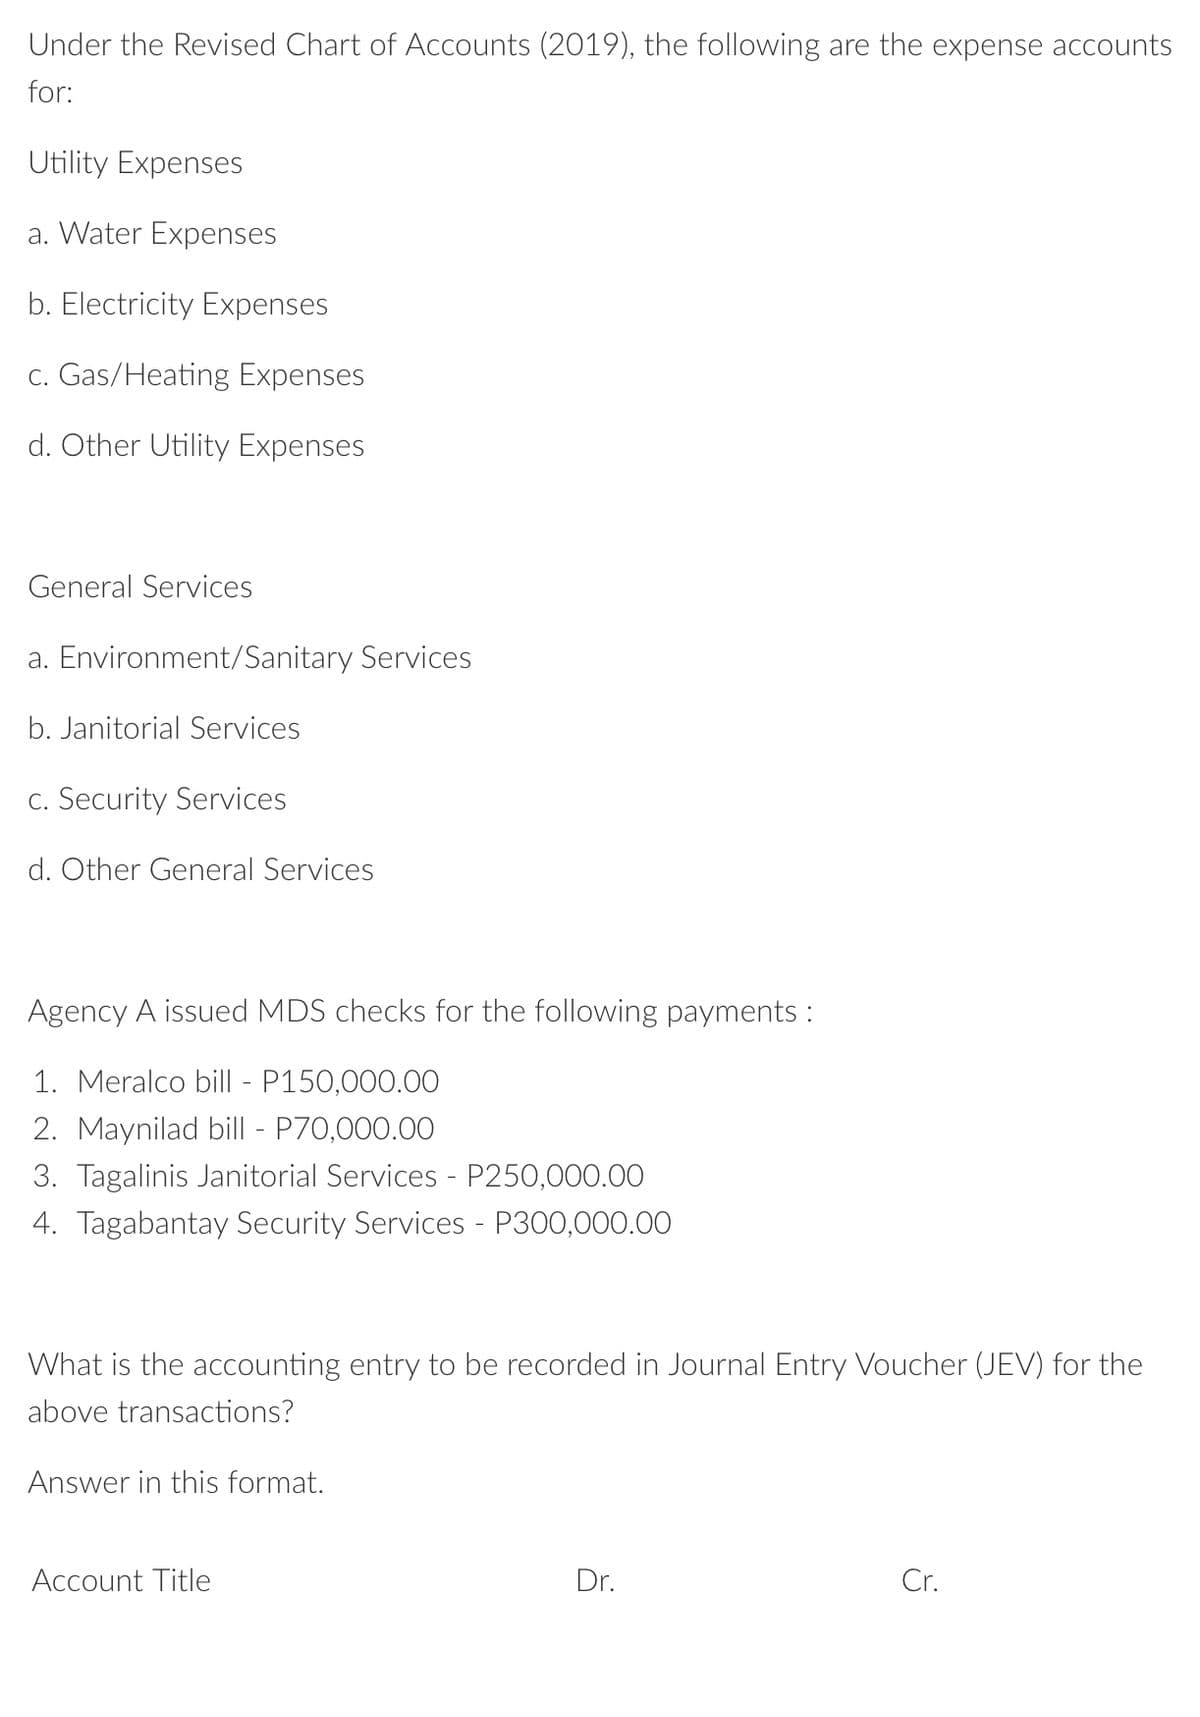 Under the Revised Chart of Accounts (2019), the following are the expense accounts
for:
Utility Expenses
a. Water Expenses
b. Electricity Expenses
c. Gas/Heating Expenses
d. Other Utility Expenses
General Services
a. Environment/Sanitary Services
b. Janitorial Services
C. Security Services
d. Other General Services
Agency A issued MDS checks for the following payments :
1. Meralco bill - P150,000.00
2. Maynilad bill - P70,000.00
3. Tagalinis Janitorial Services - P250,000.00O
4. Tagabantay Security Services - P300,000.00
What is the accounting entry to be recorded in Journal Entry Voucher (JEV) for the
above transactions?
Answer in this format.
Account Title
Dr.
Cr.
